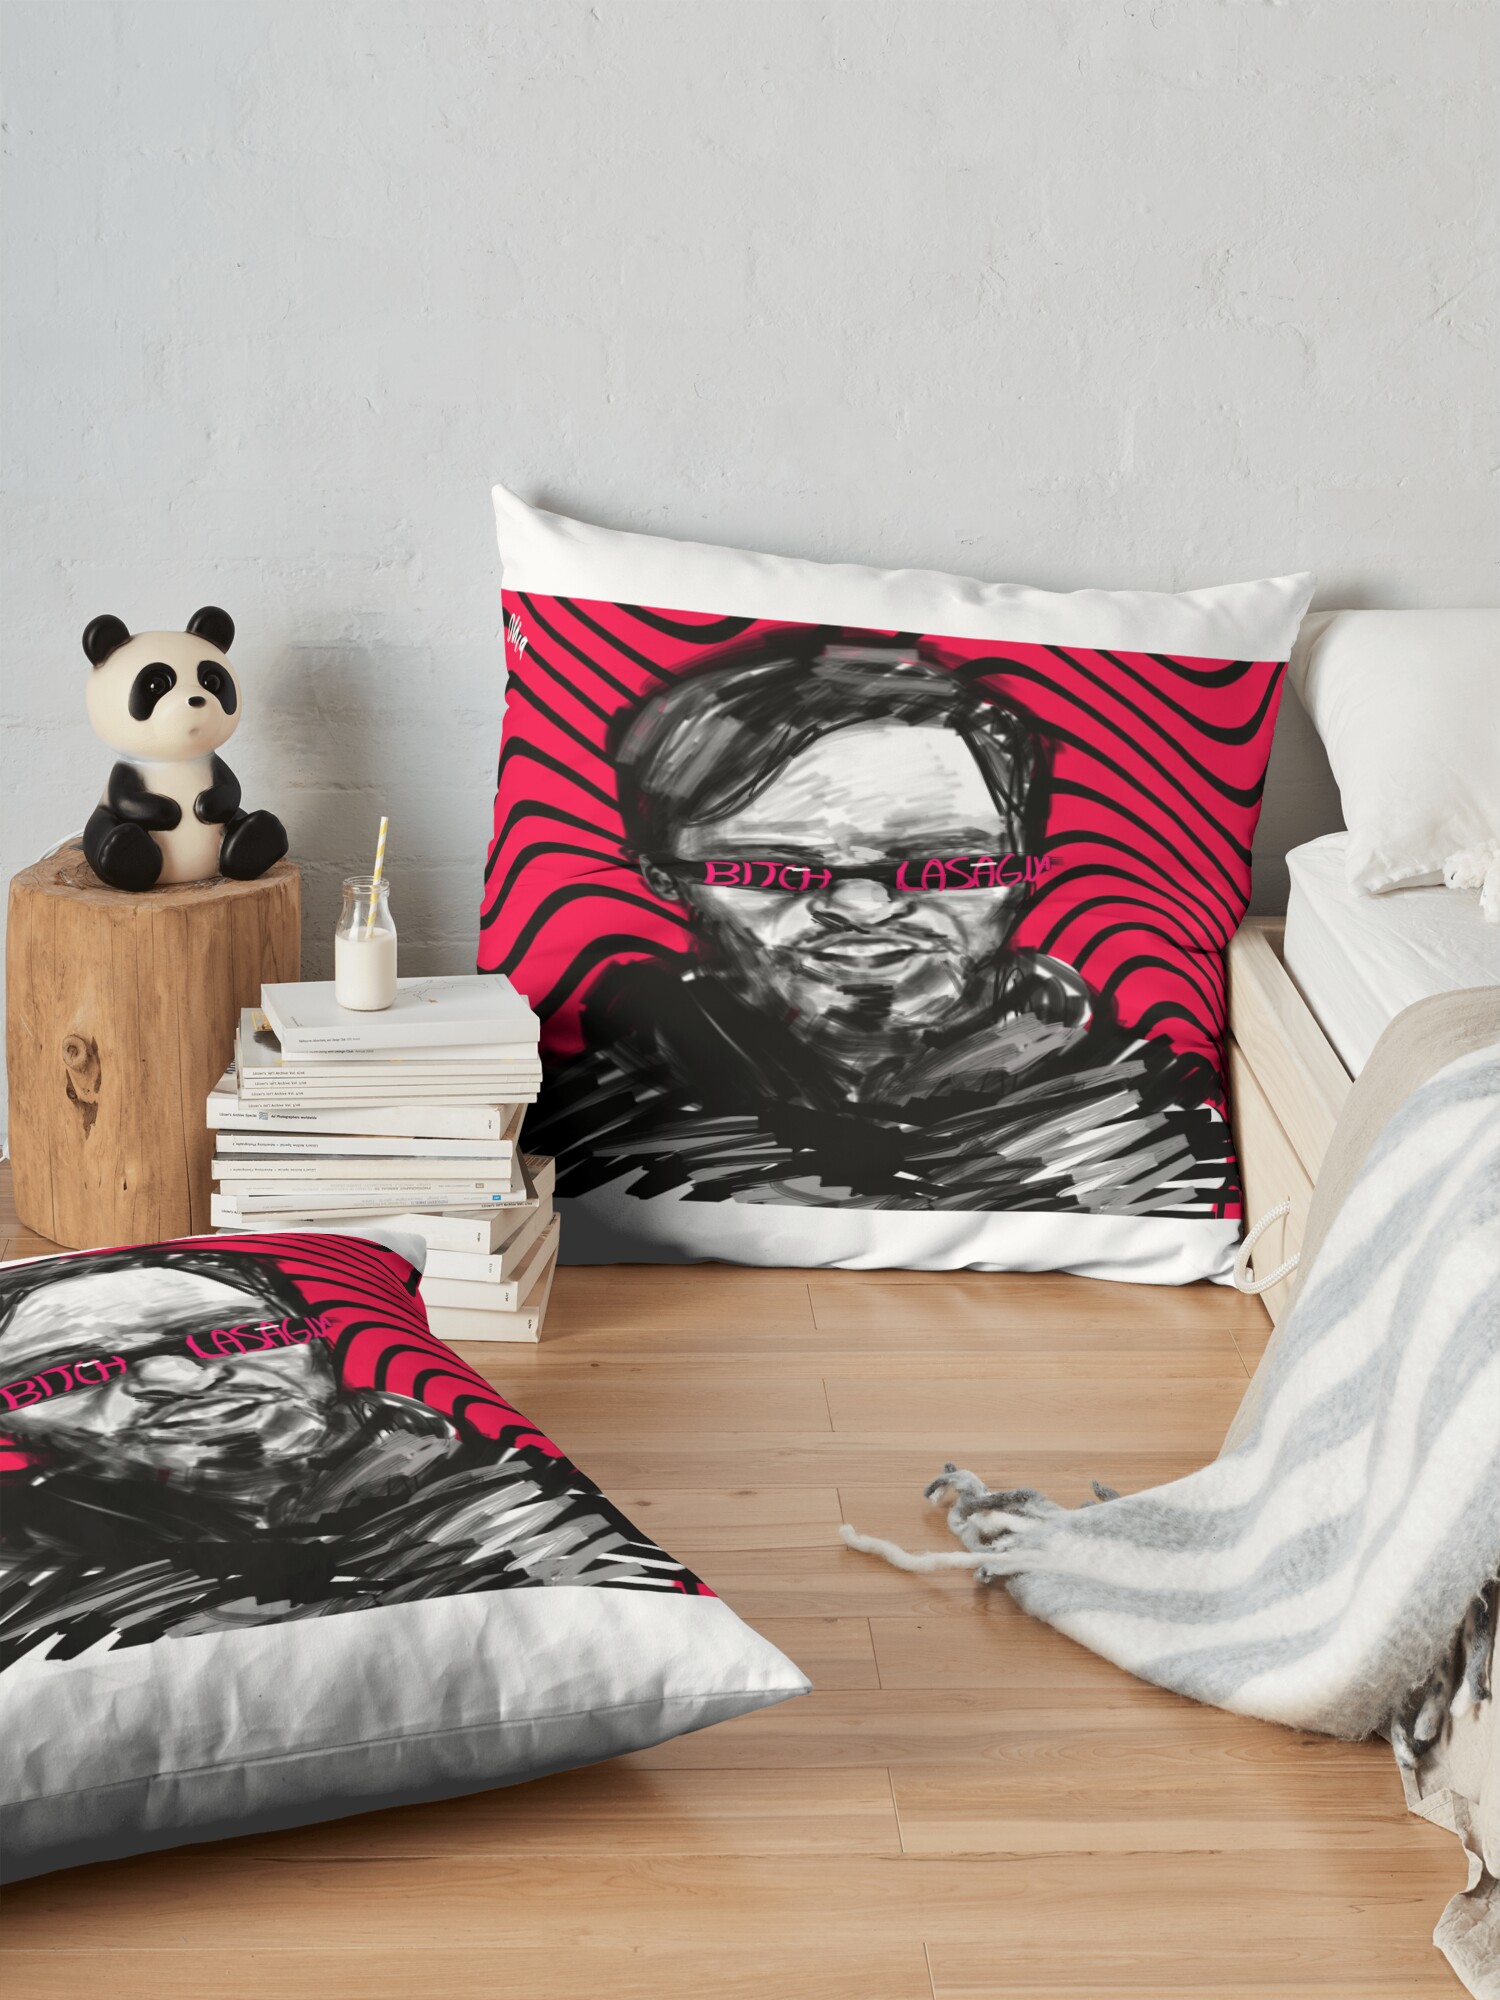 throwpillowsecondary 36x362000x2000 bgf8f8f8 7 - Pewdiepie Store